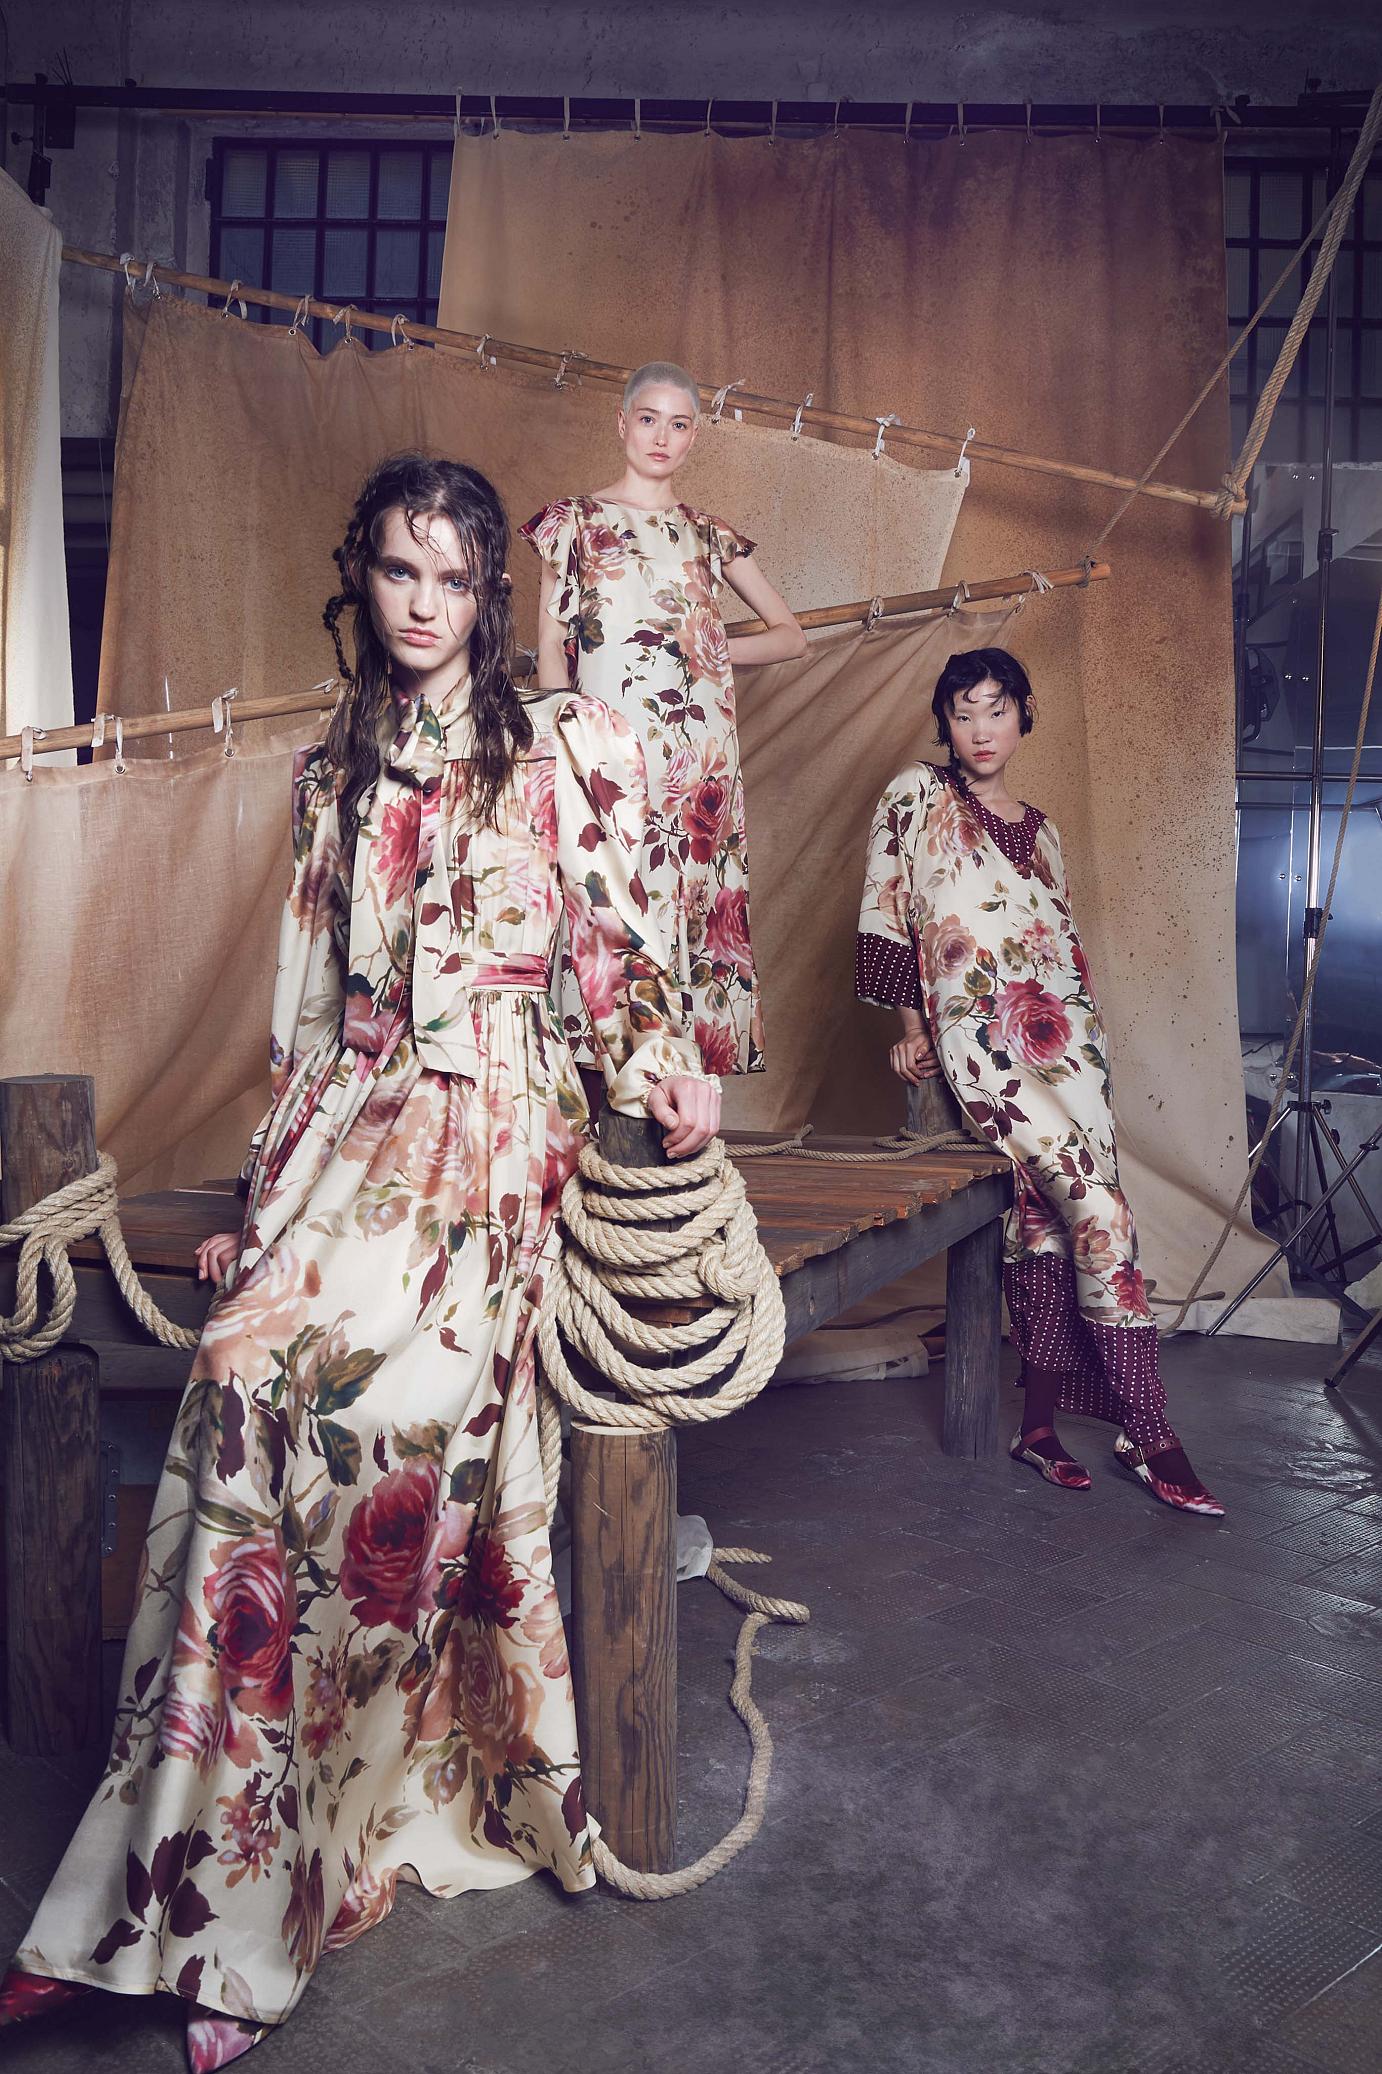 CoqCreative power by ProductionLink s.r.l. Antonio-Marras-Resort-2024 Antonio-Marras-Resort-2024  Antonio-Marras-Resort-2024